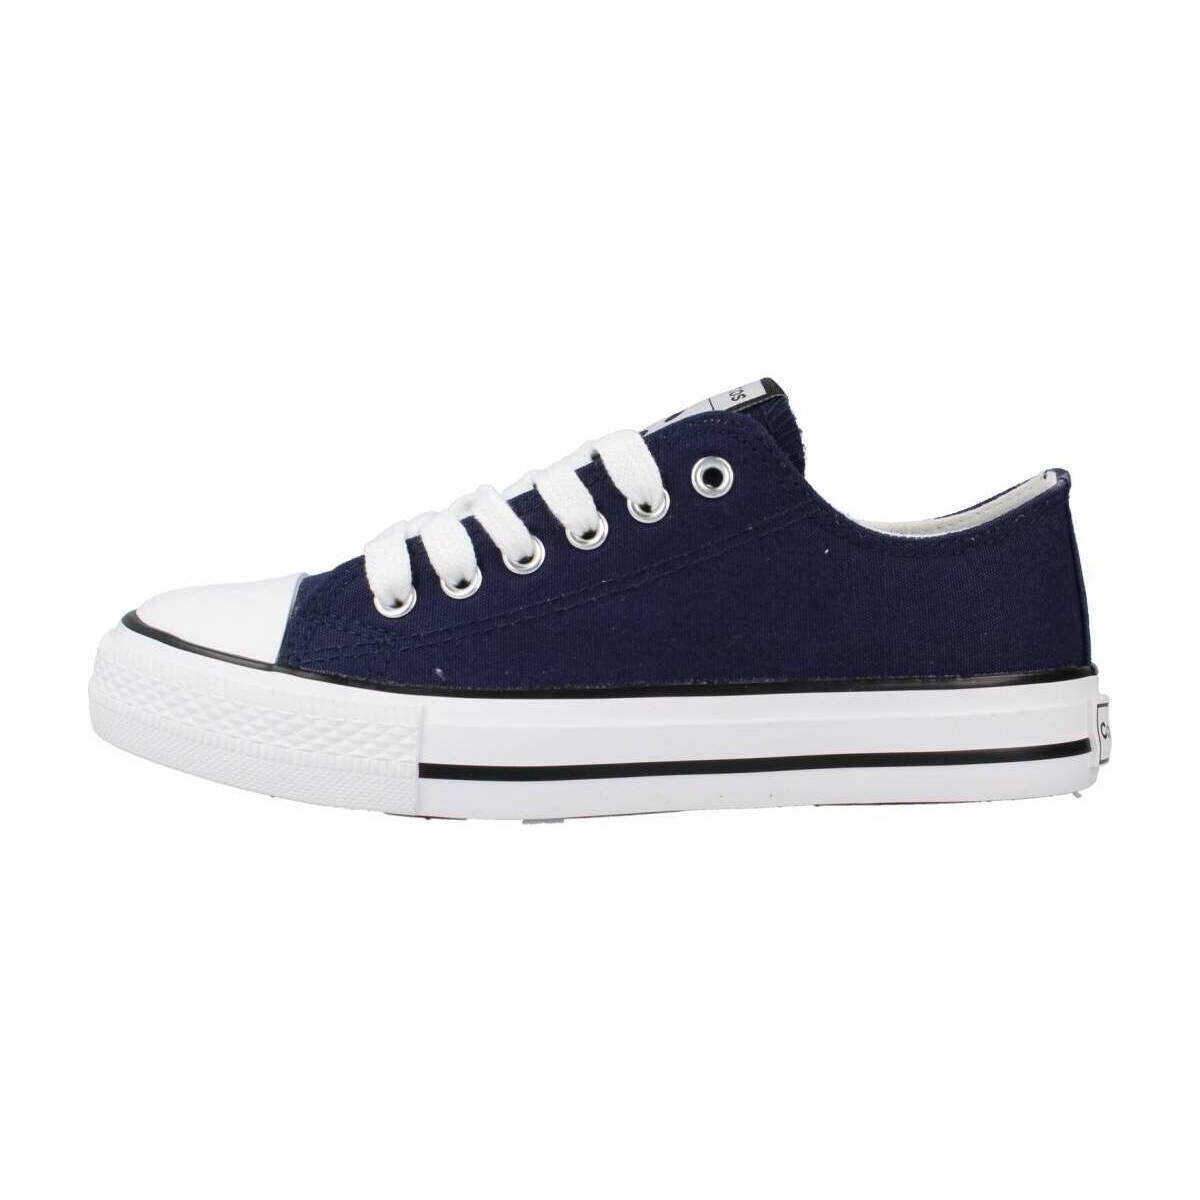 Xαμηλά Sneakers Conguitos NV128301